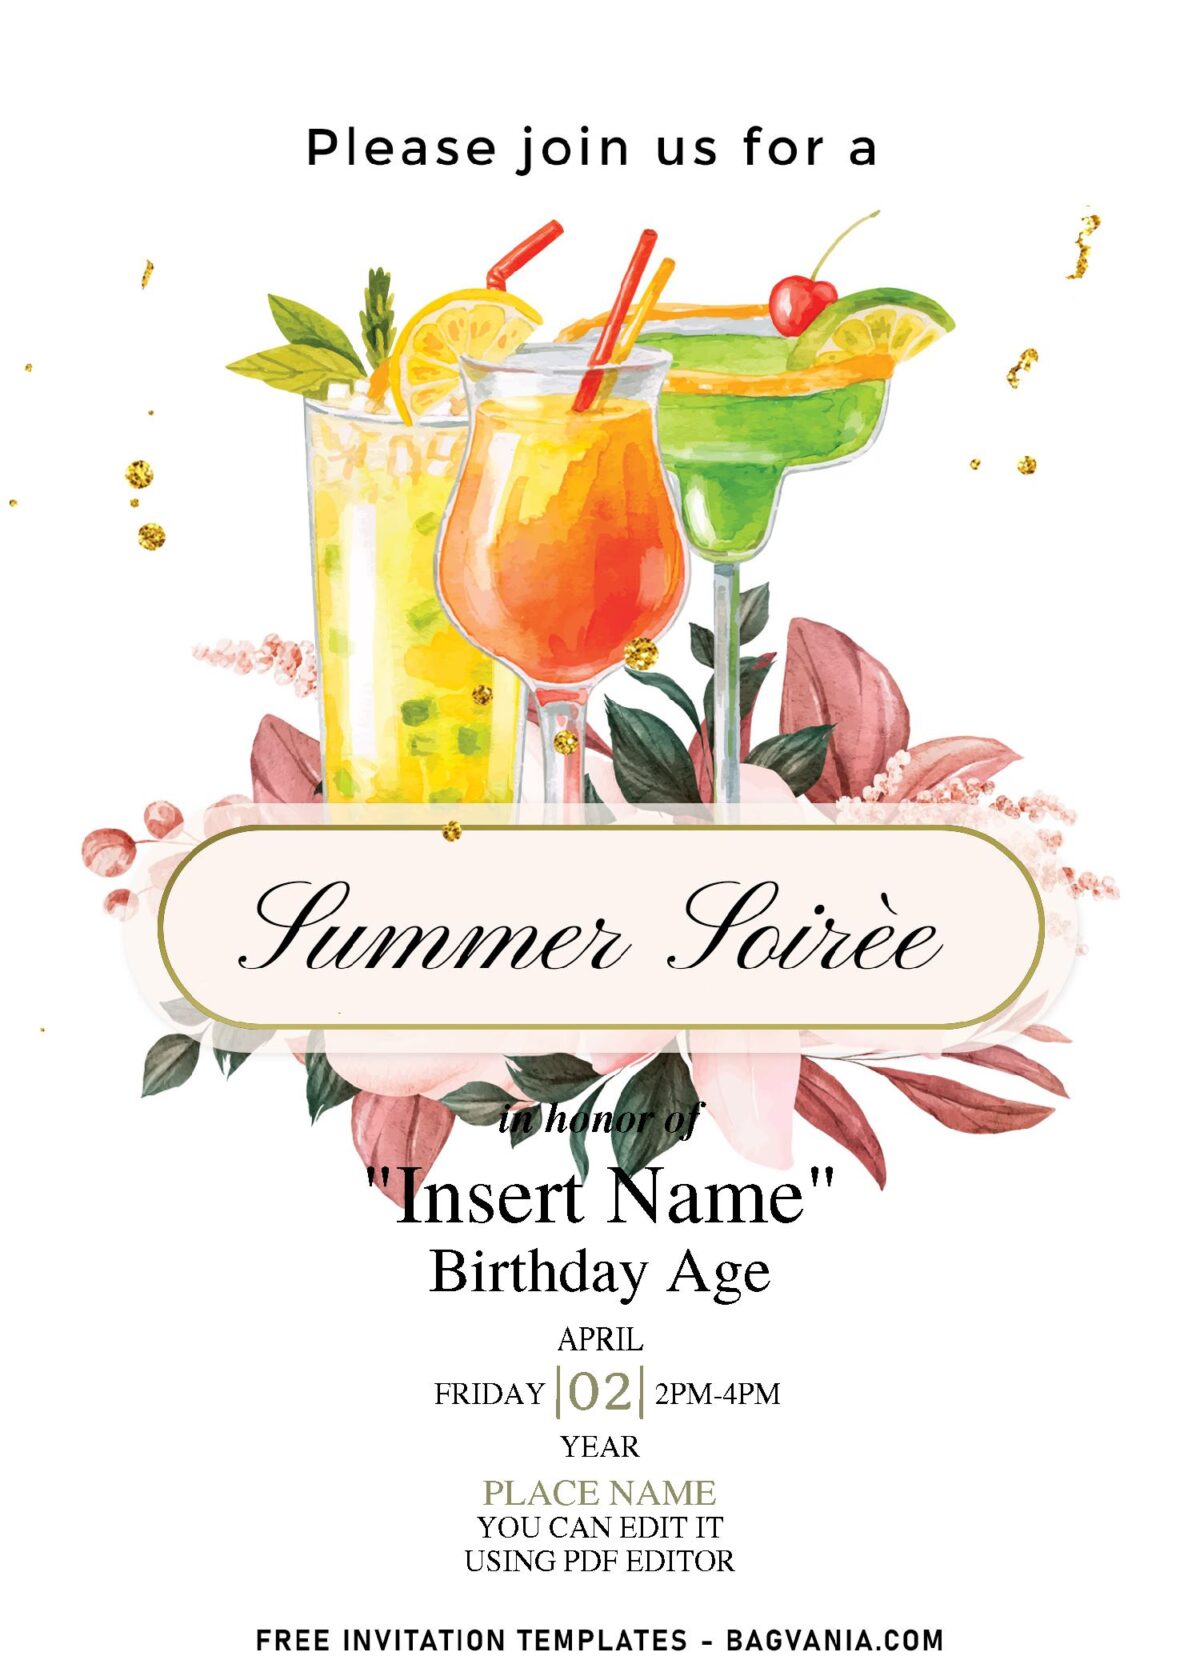 (Free Editable PDF) Fun Summer Soiree Invitation Templates That You Don't Want To Miss with elegant script